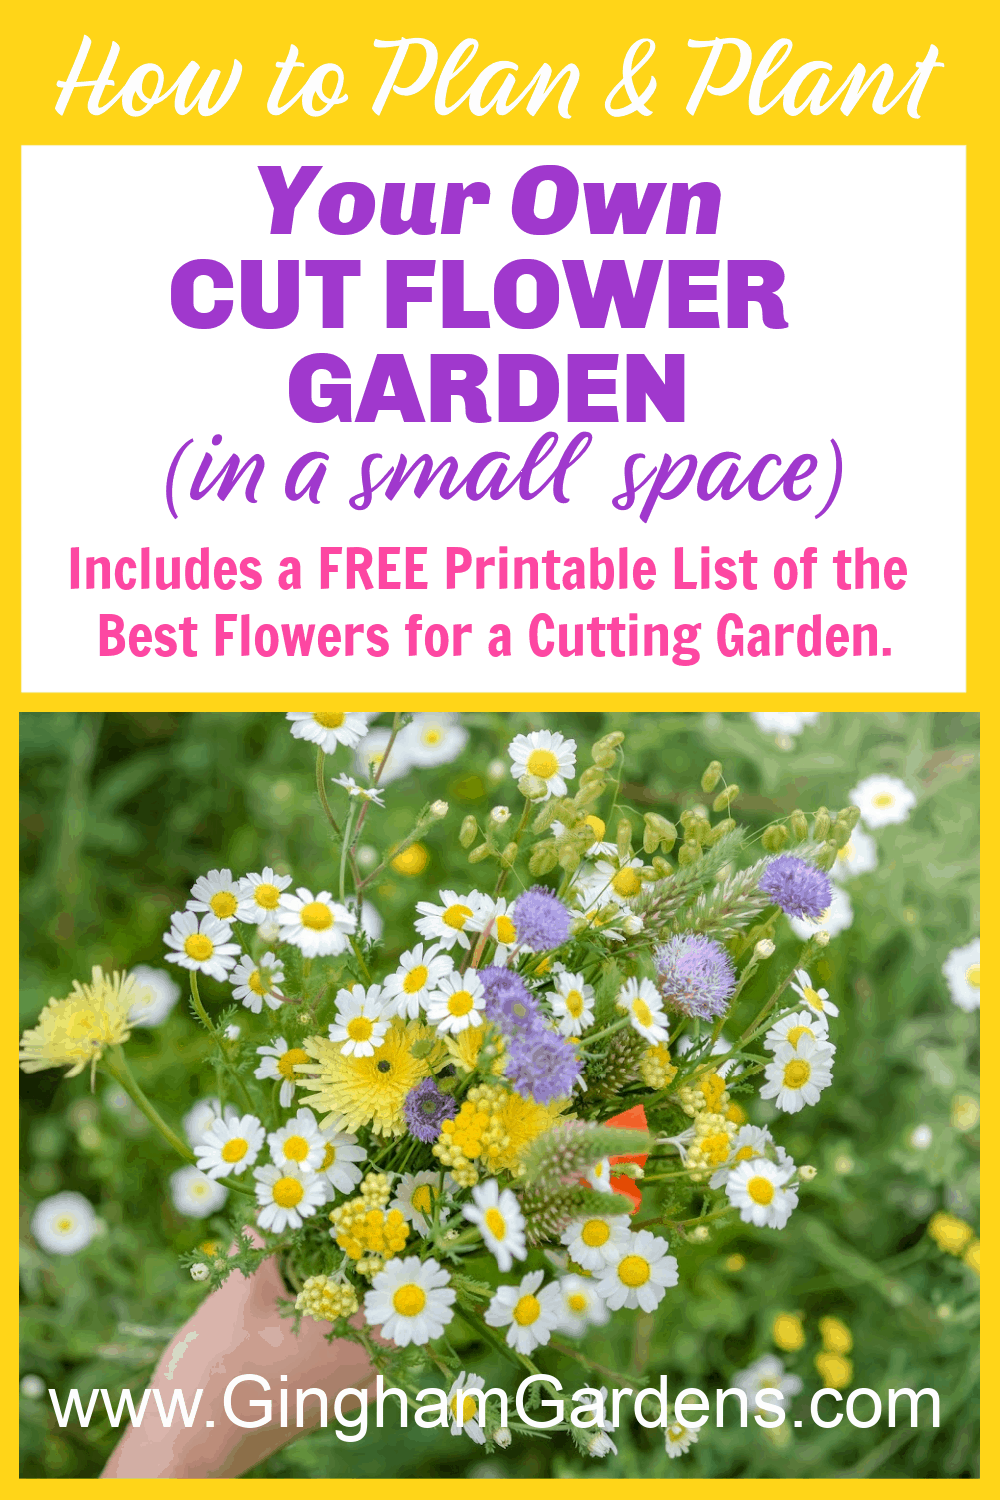 Image of Flowers with Text Overlay - How to Plan & Plant Your Own Cut Flower Garden